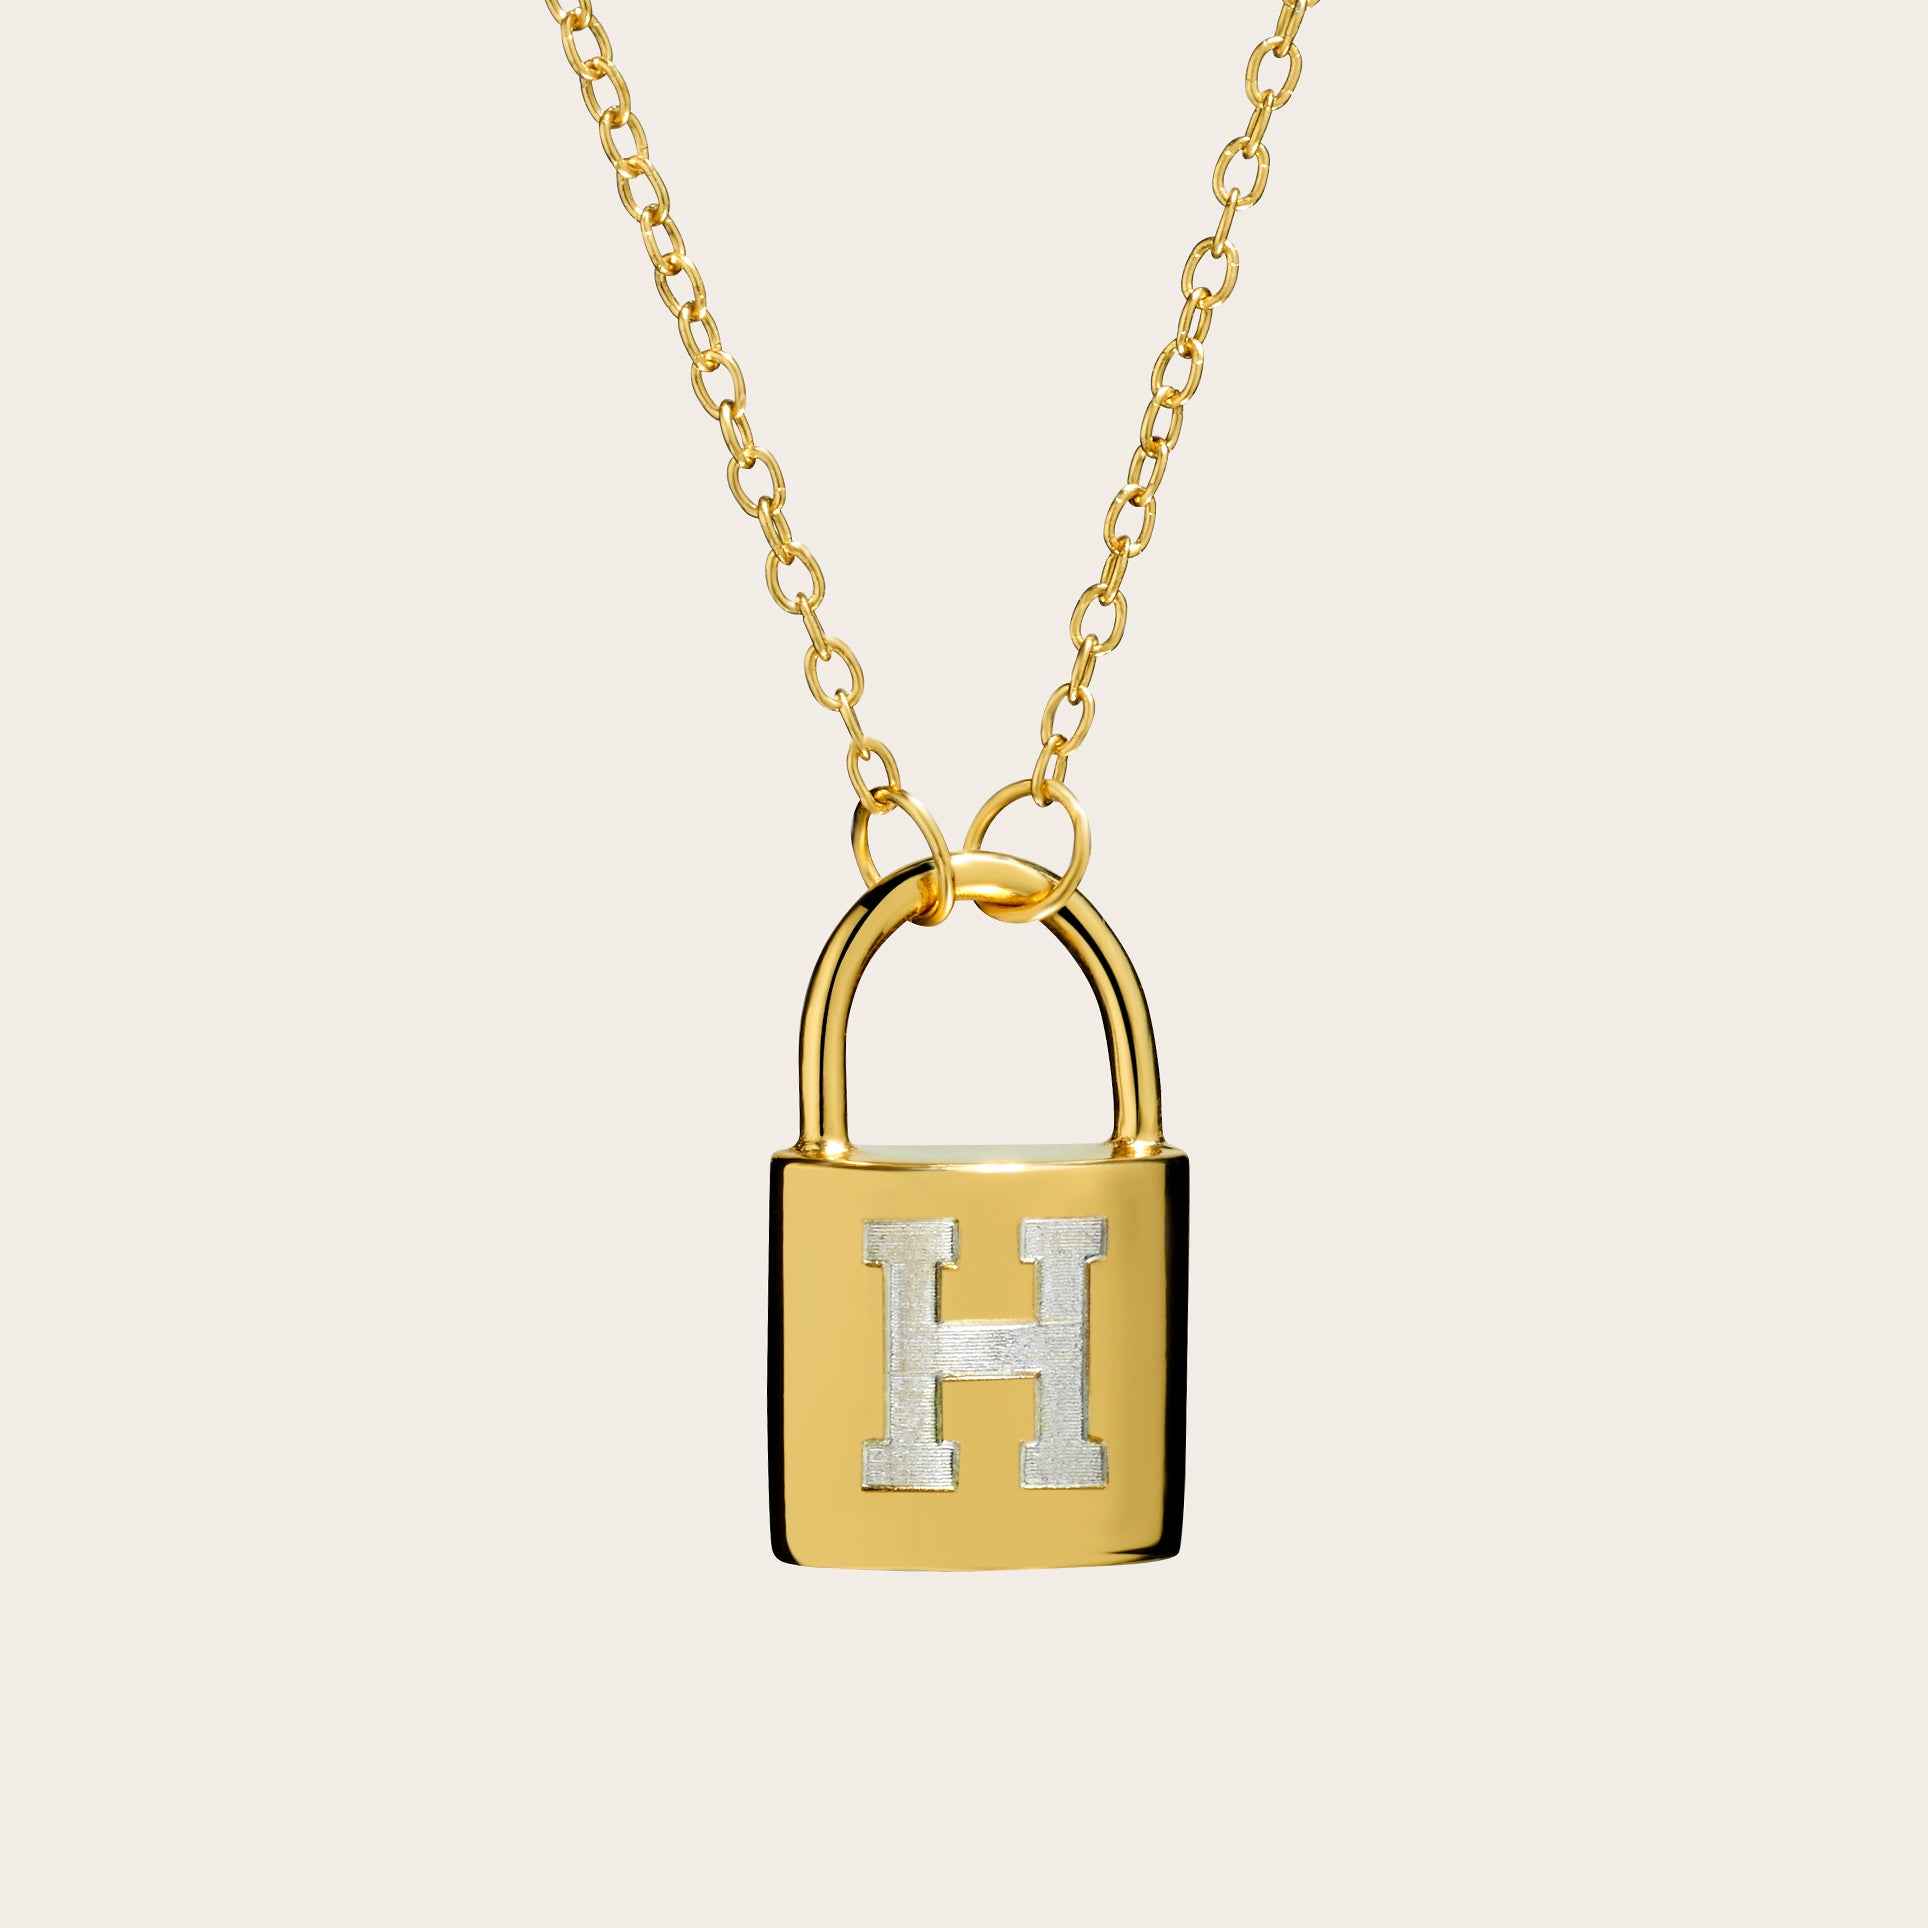 Harvard Padlock Pendant - Sterling Silver, Gold Vermeil, and 14kt Yellow Gold